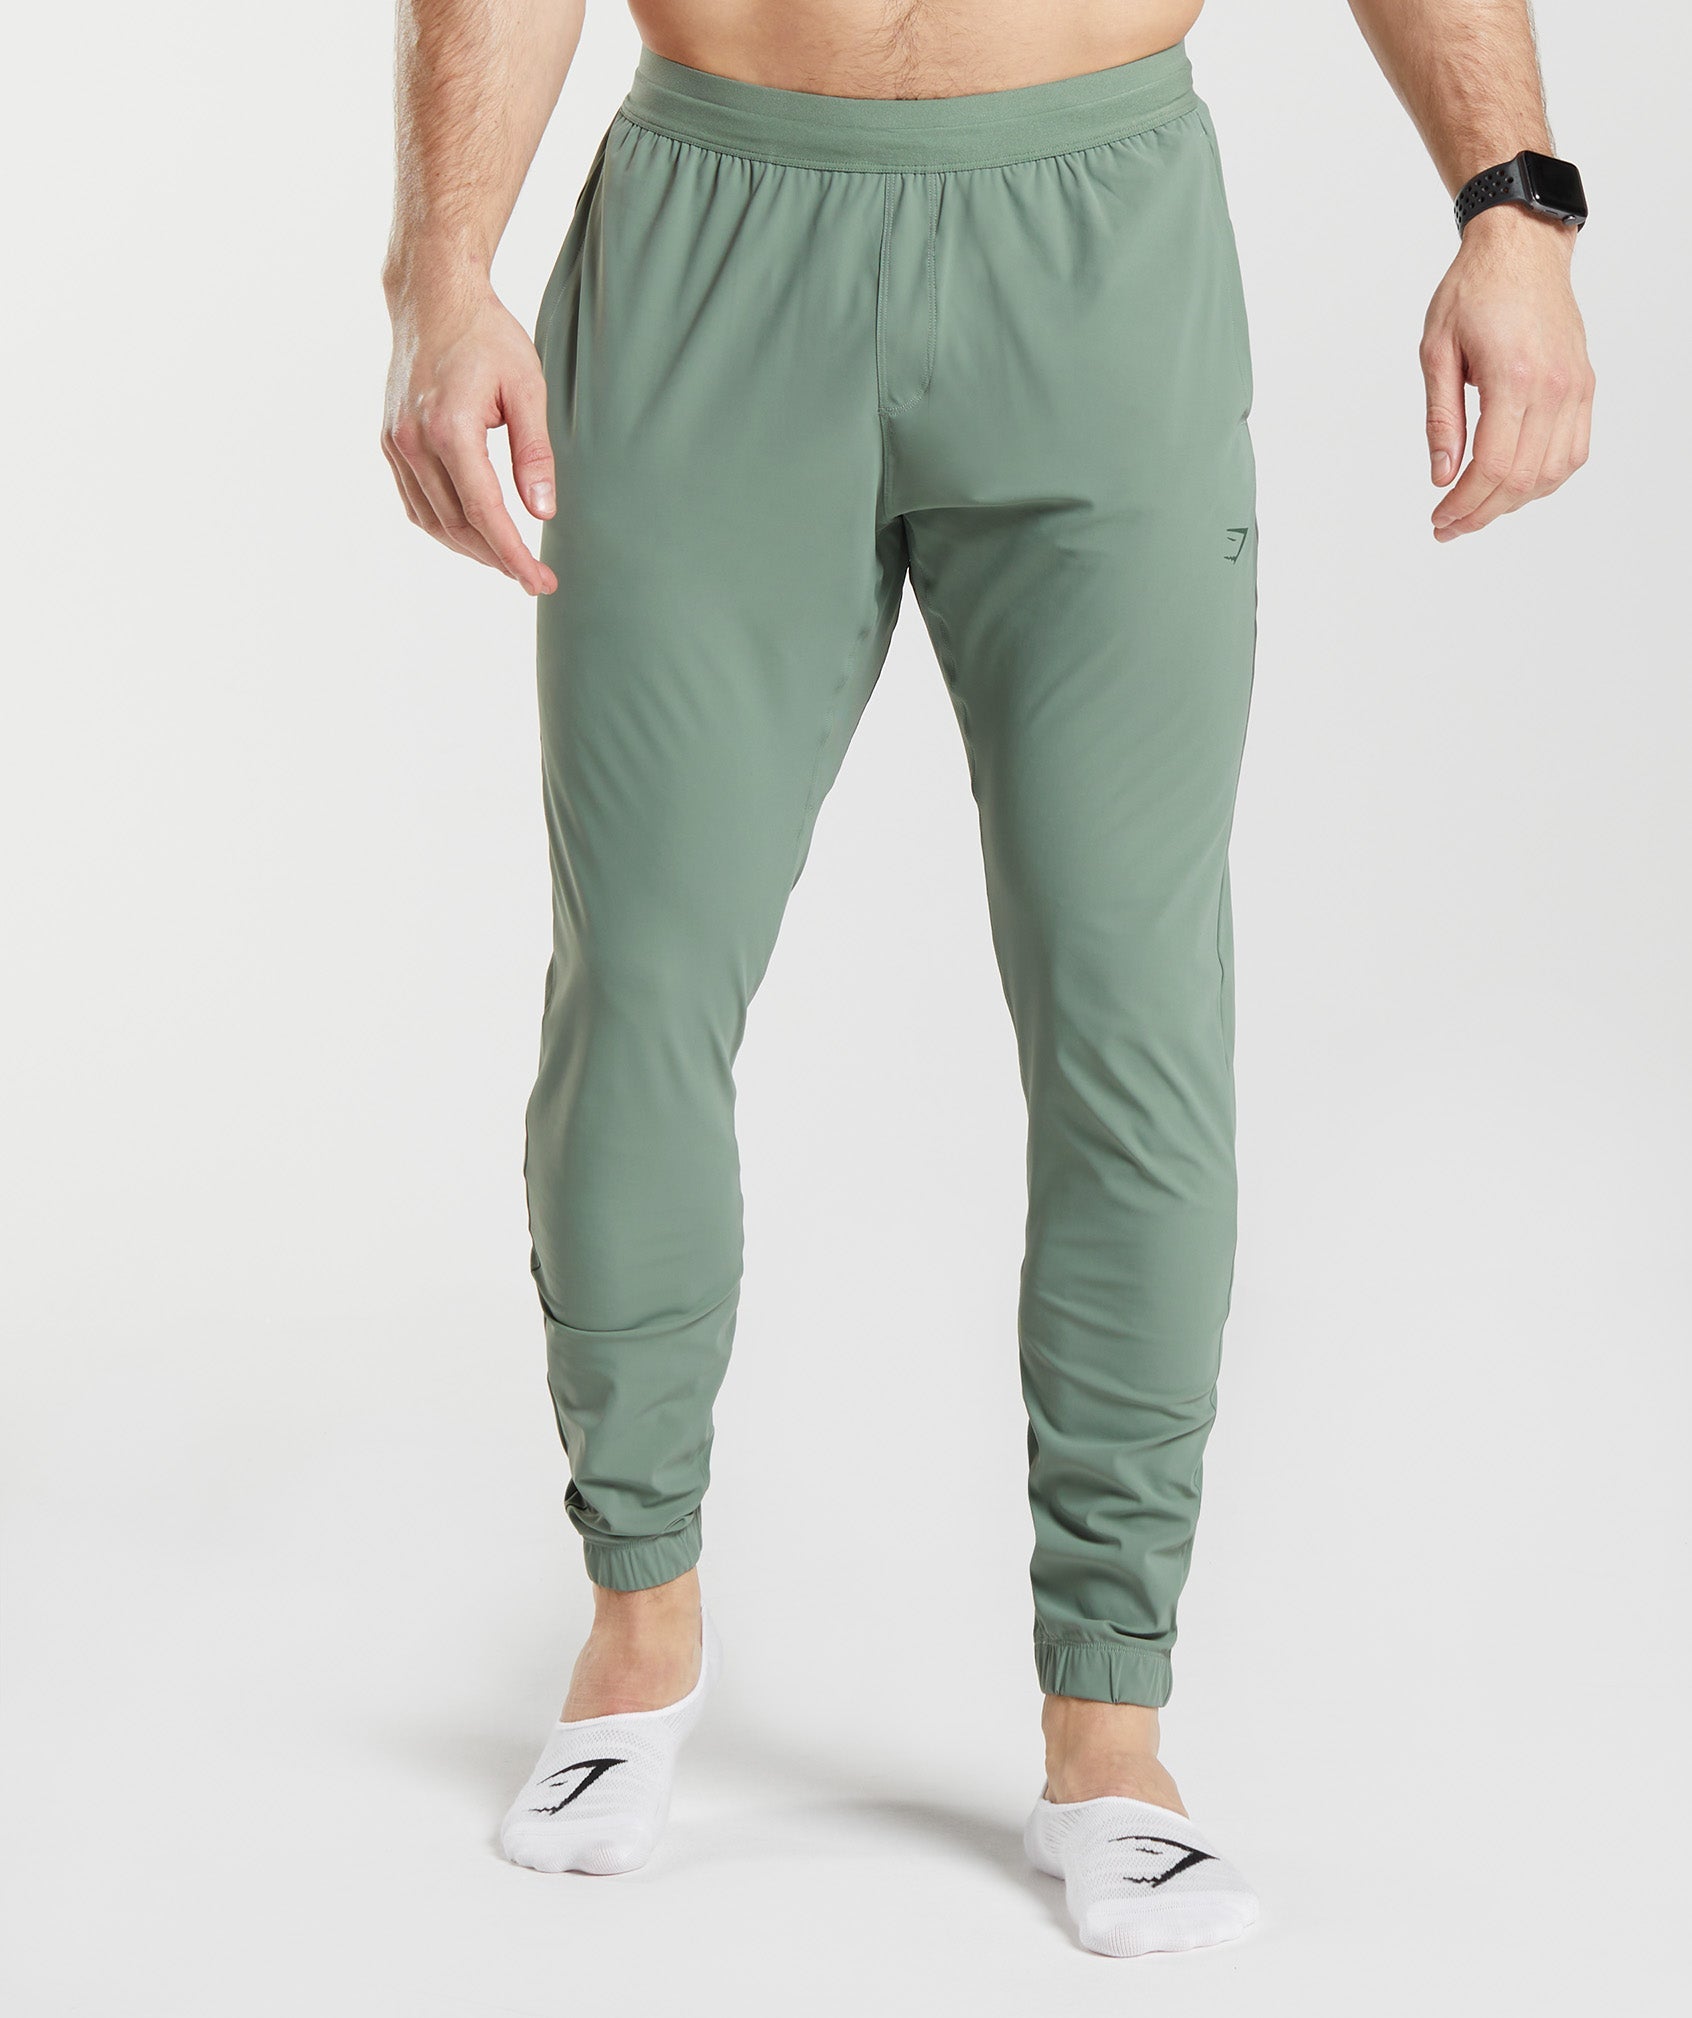 Studio Joggers in Willow Green - view 1